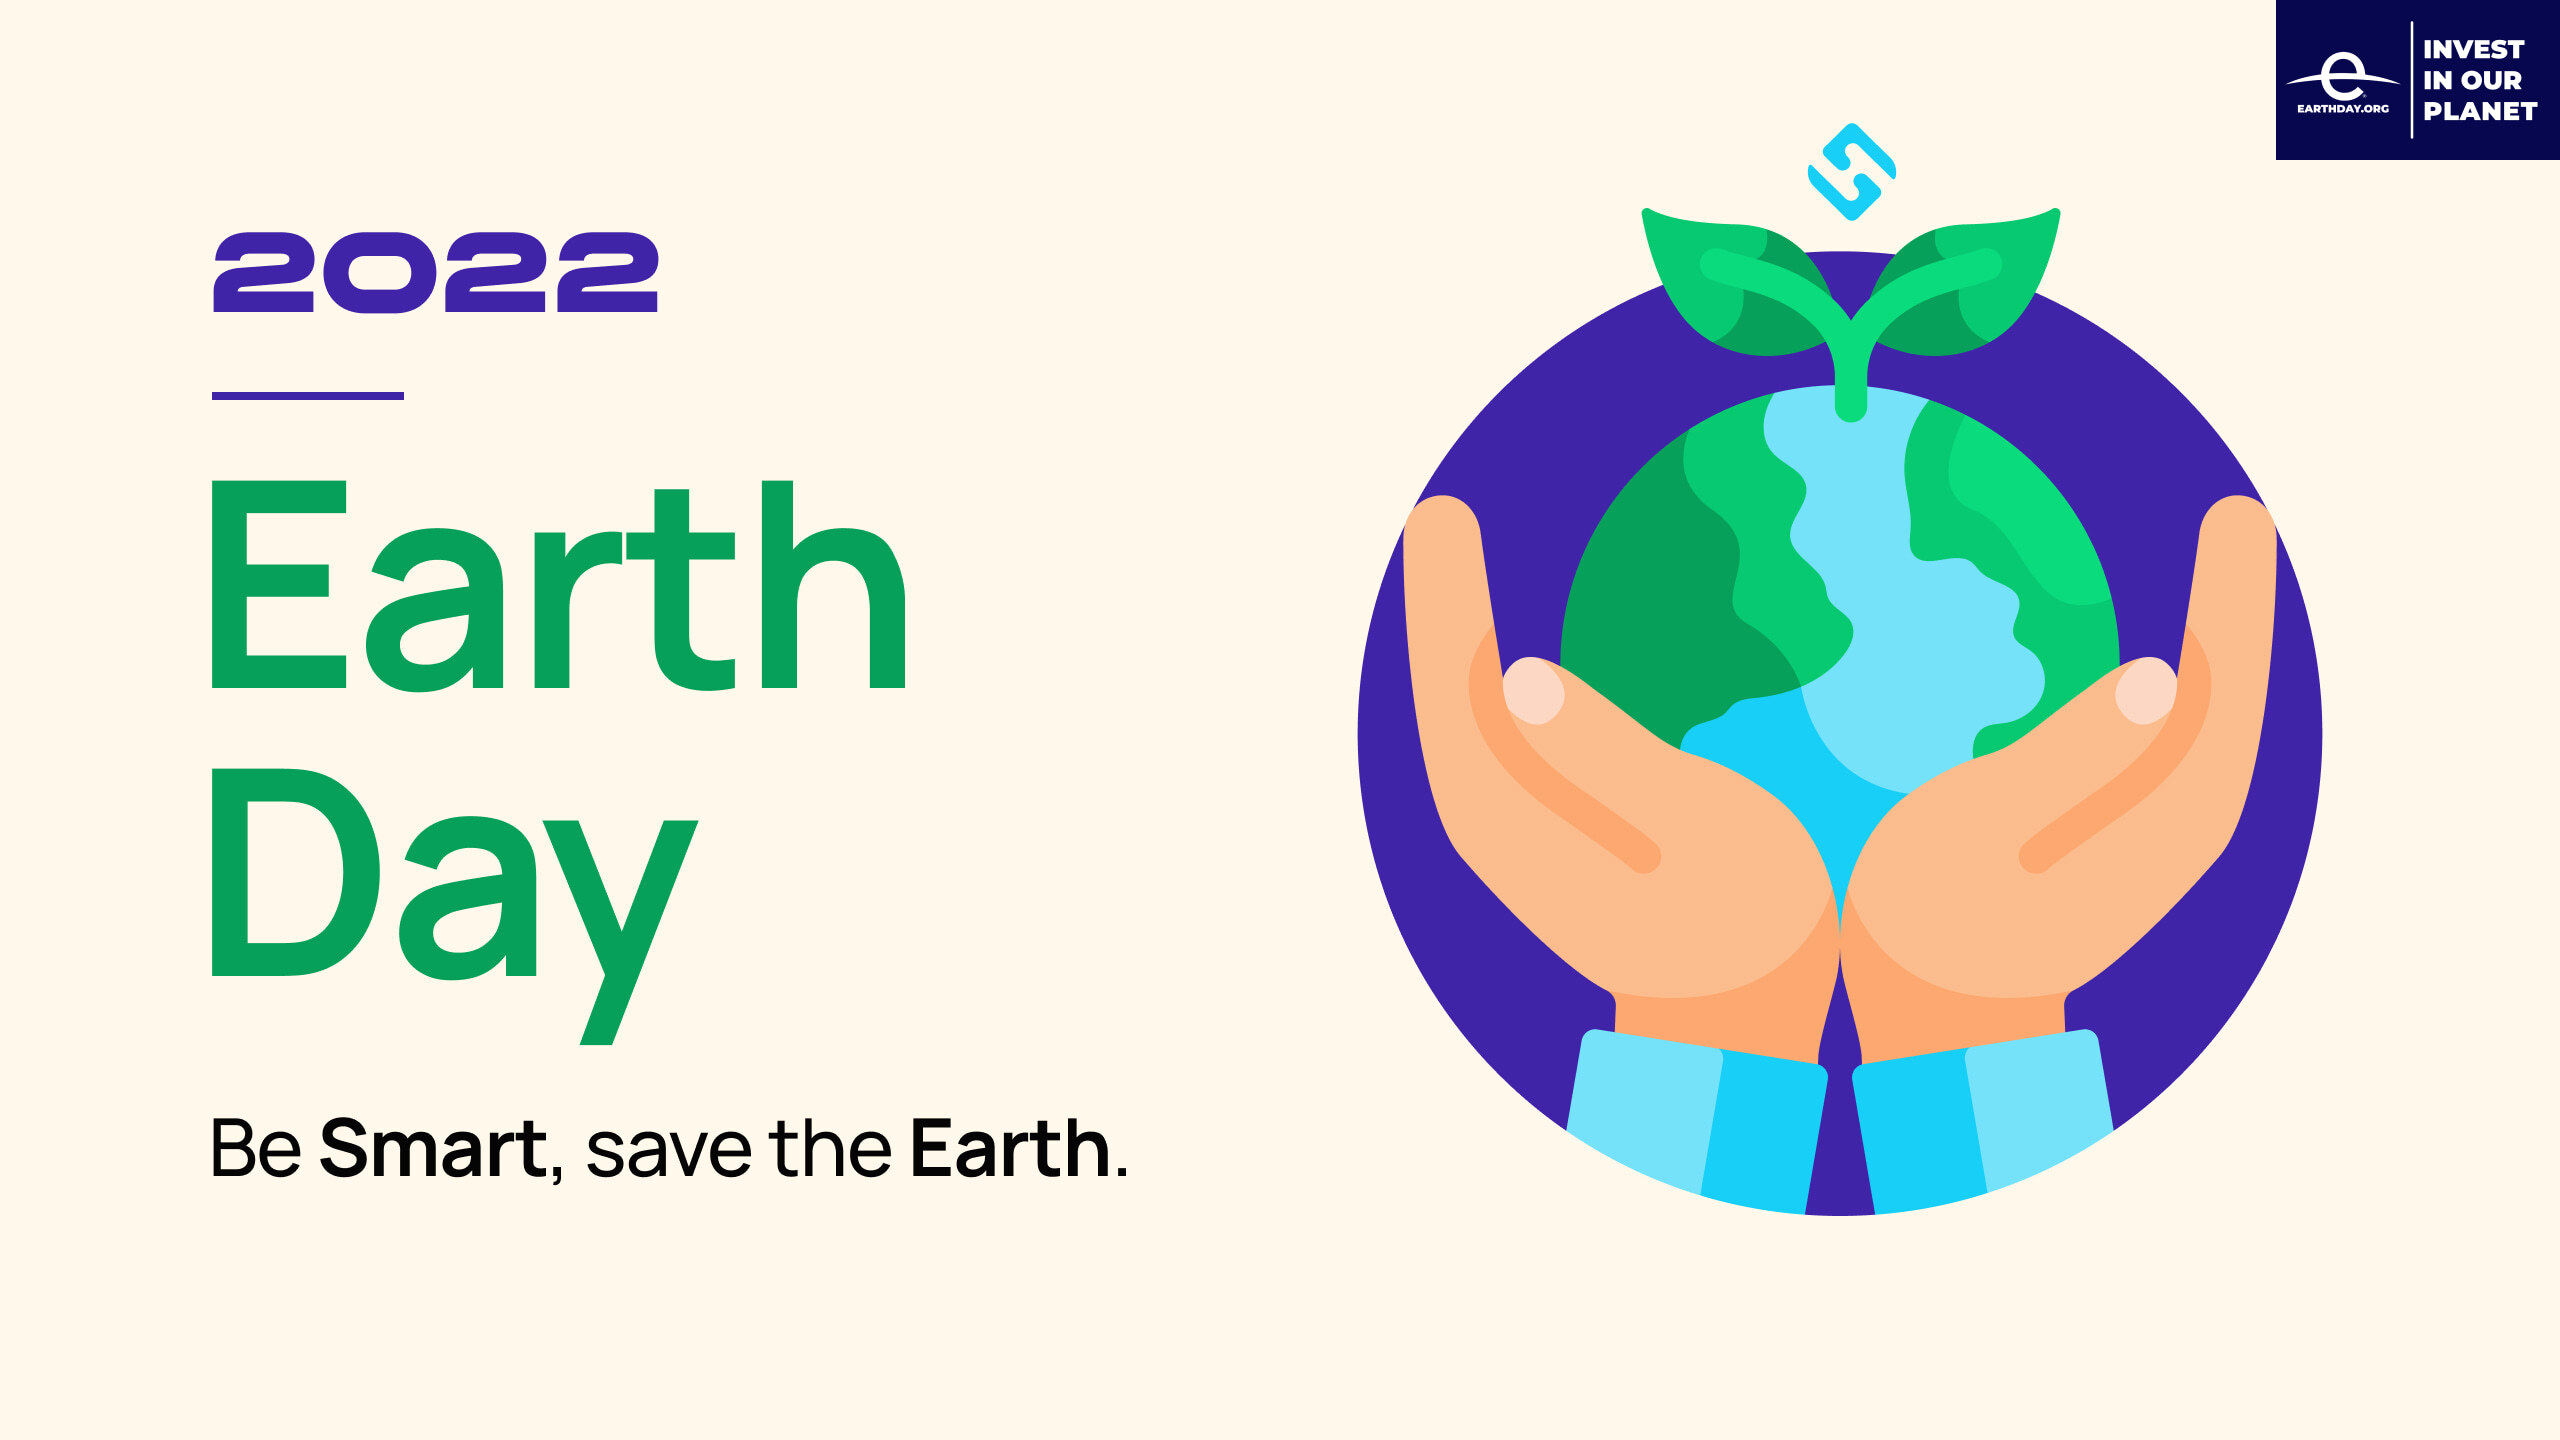 Save money and save the Earth